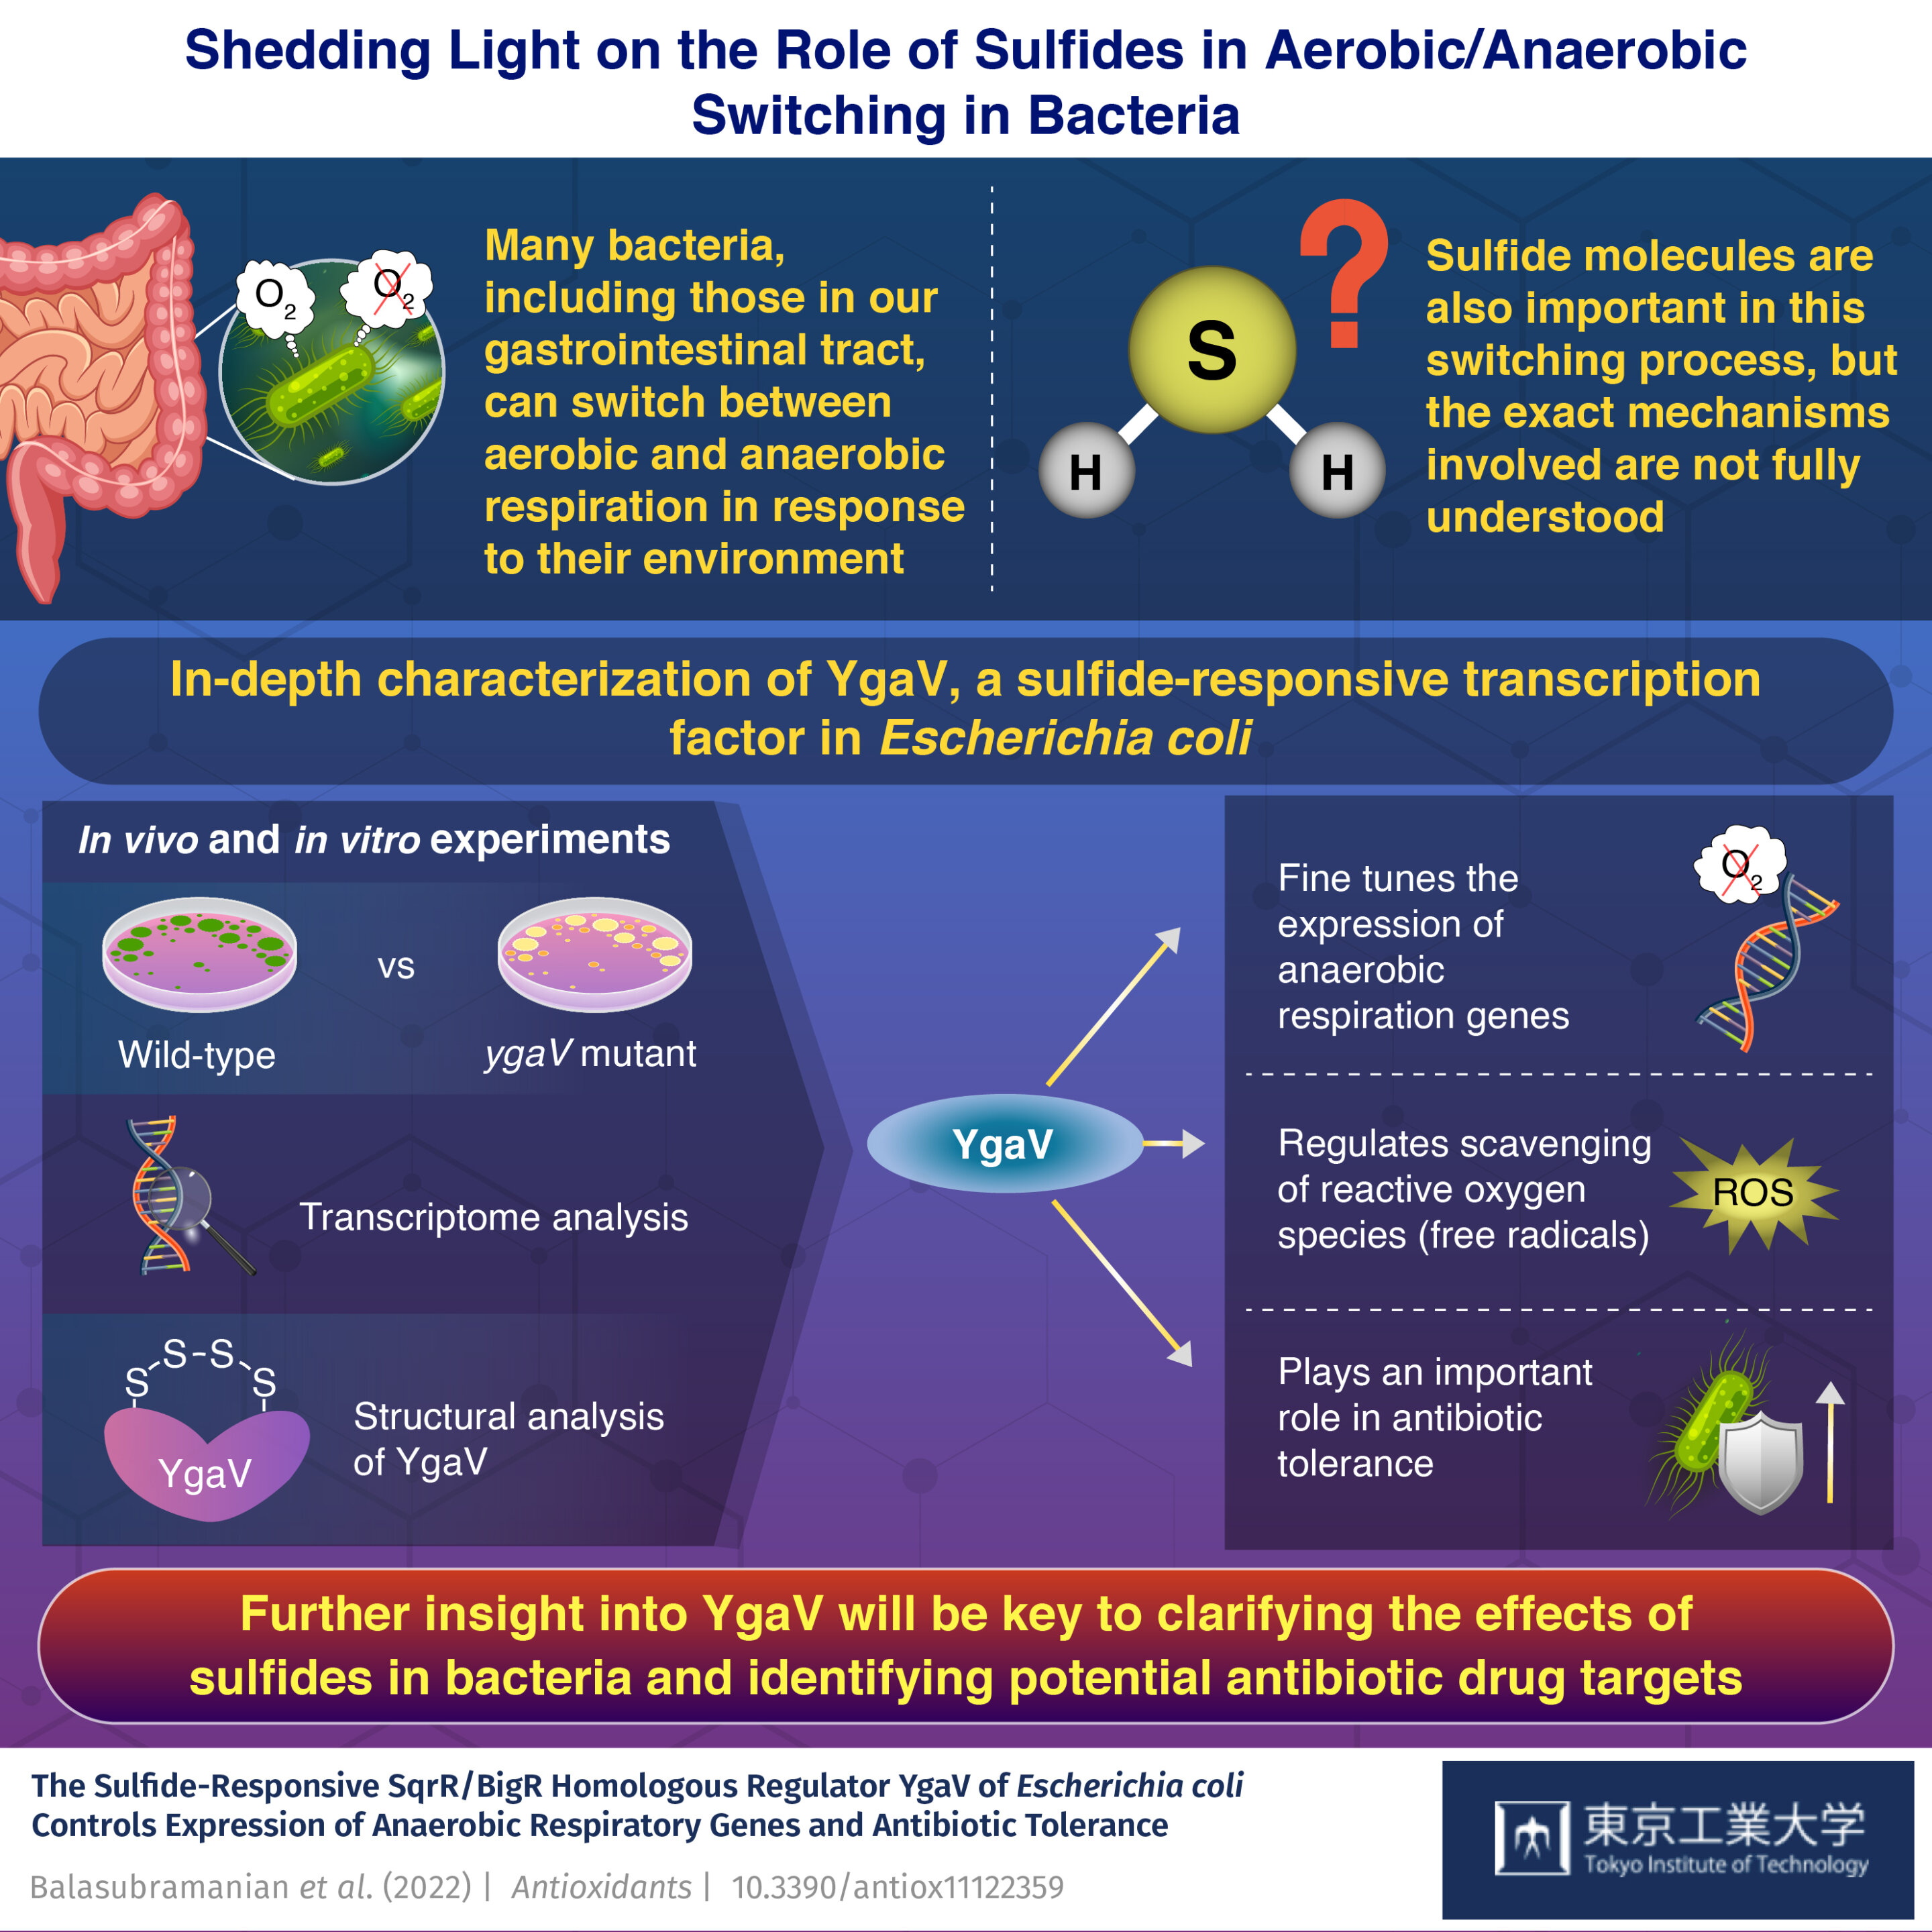 #Researchers investigate the role of sulfides in aerobic/anaerobic switching in bacteria